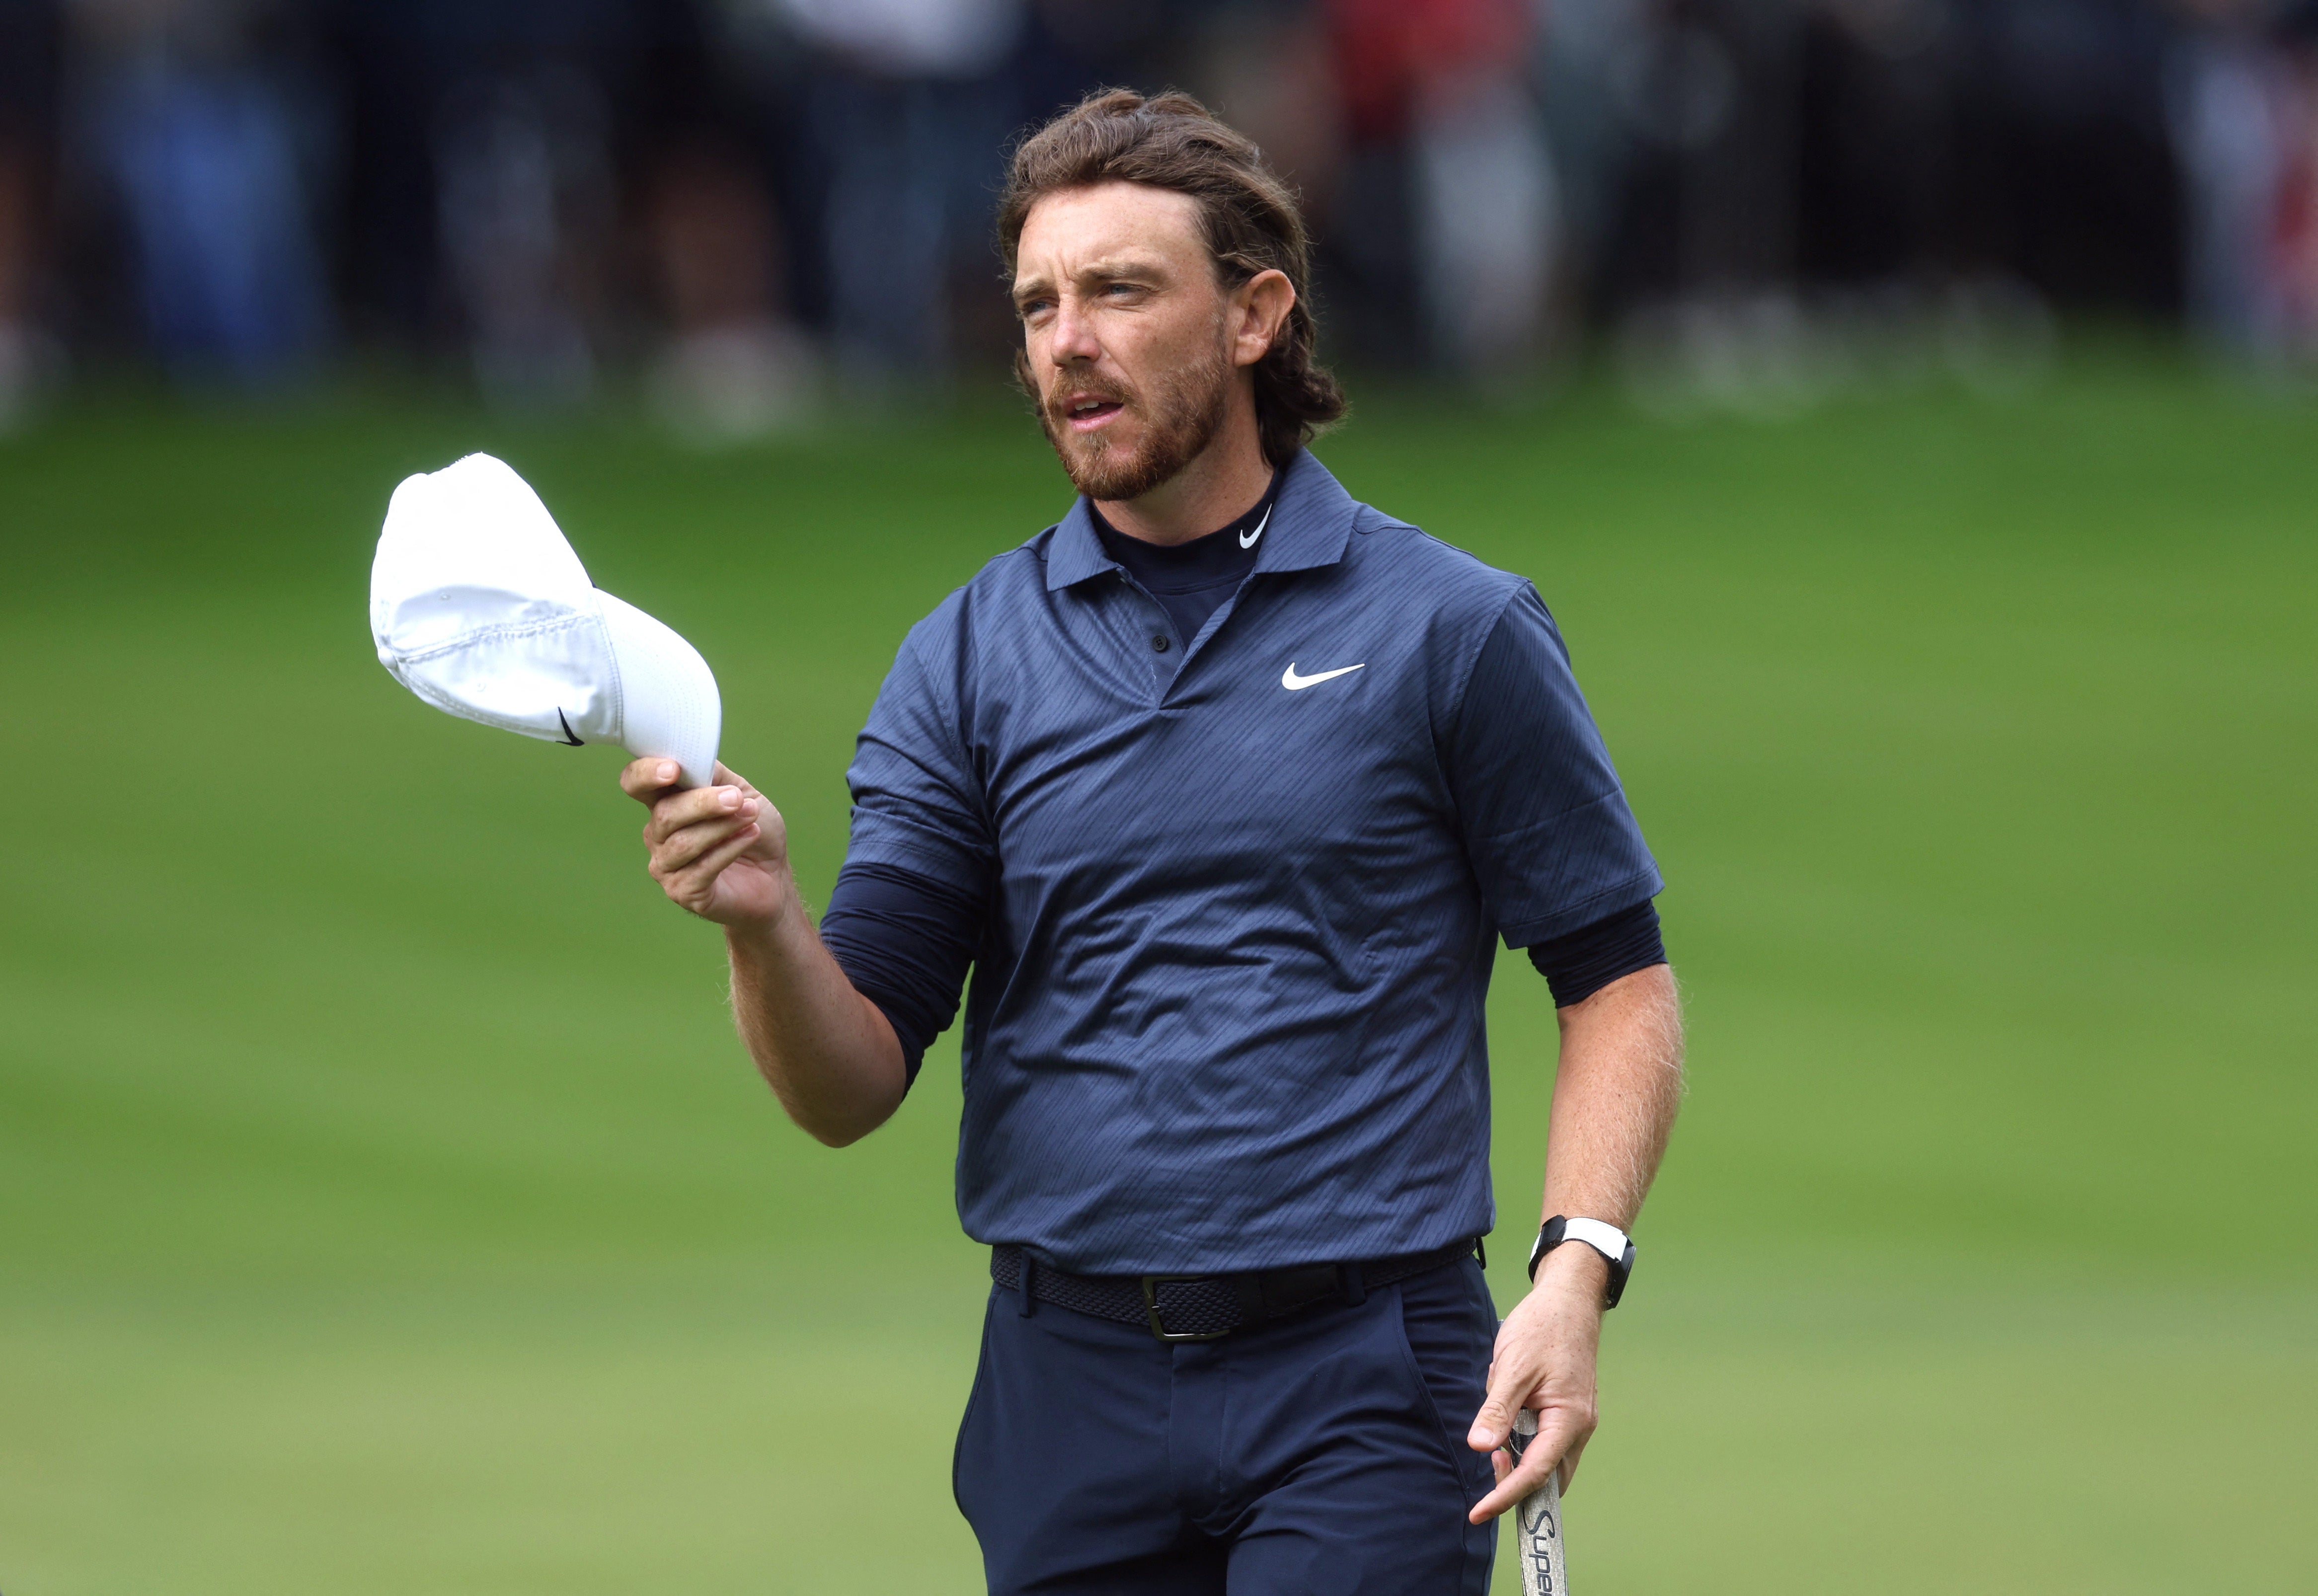 Fleetwood carded an opening 64 at Wentworth